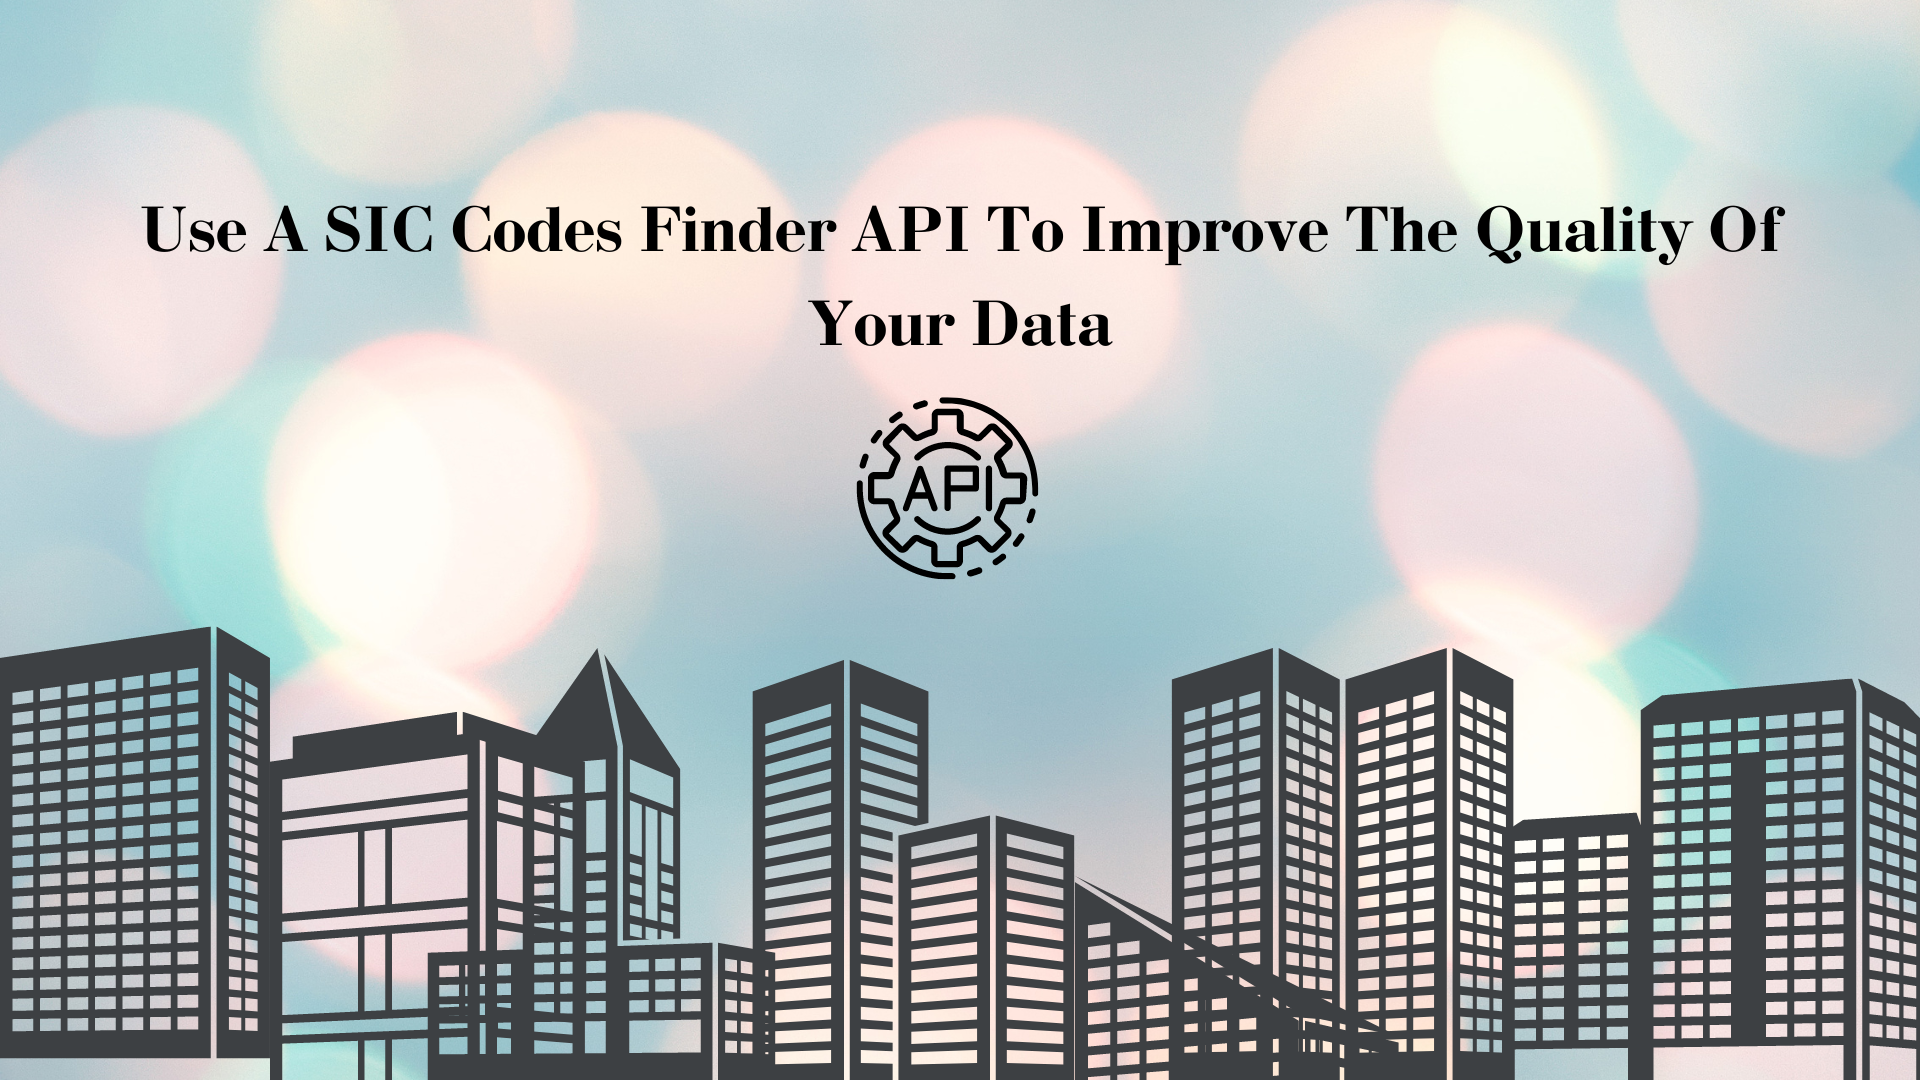 Use A SIC Codes Finder API To Improve The Quality Of Your Data